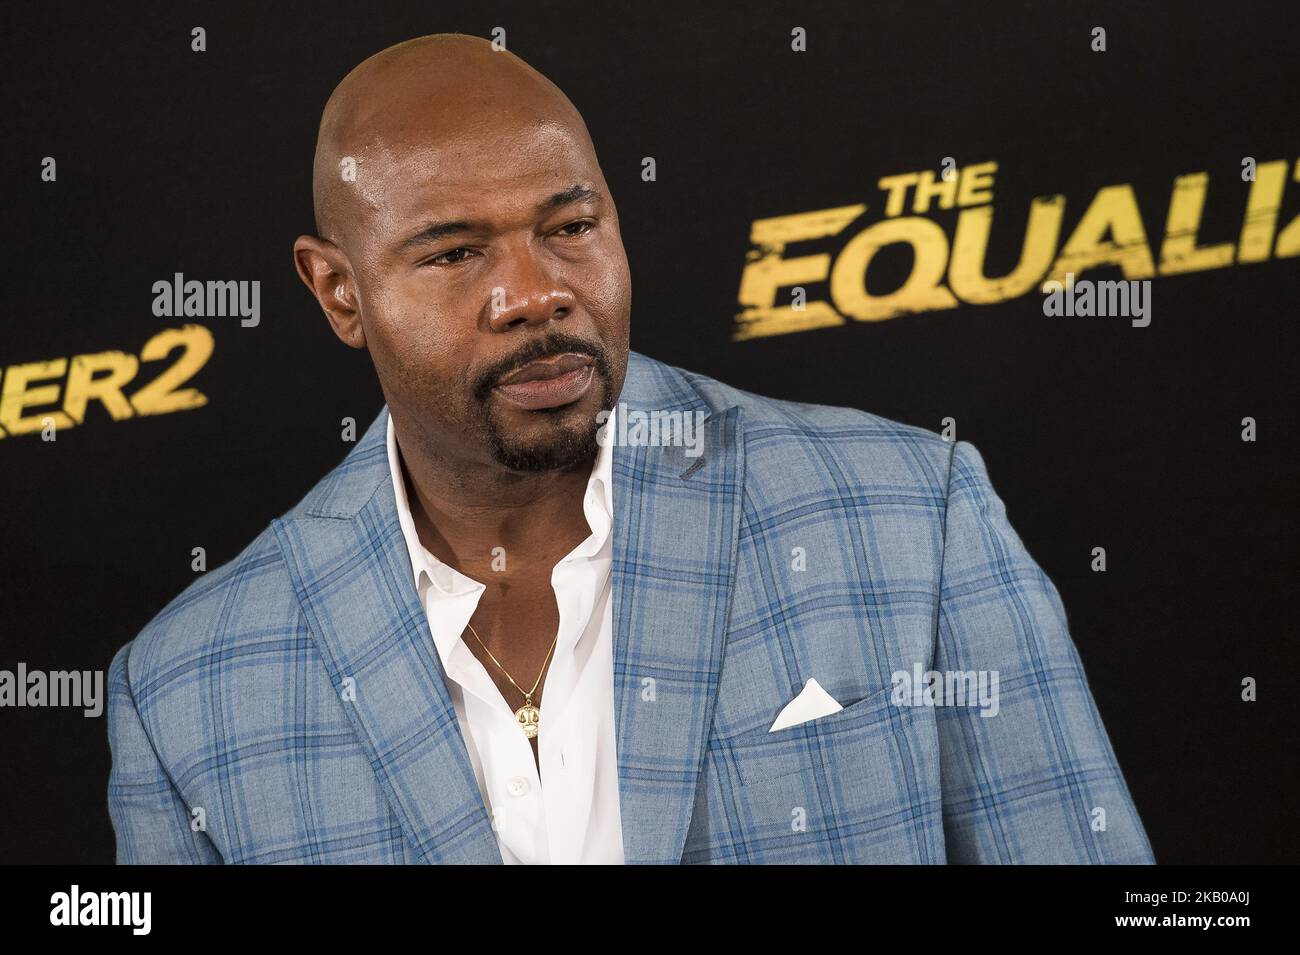 https://c8.alamy.com/comp/2KB0A0J/american-director-antoine-fuqua-attends-to-presentation-of-the-film-the-equalizer-2-at-villa-magna-hotel-in-madrid-spain-august-07-2018-photo-by-peter-sabokcoolmedianurphoto-2KB0A0J.jpg